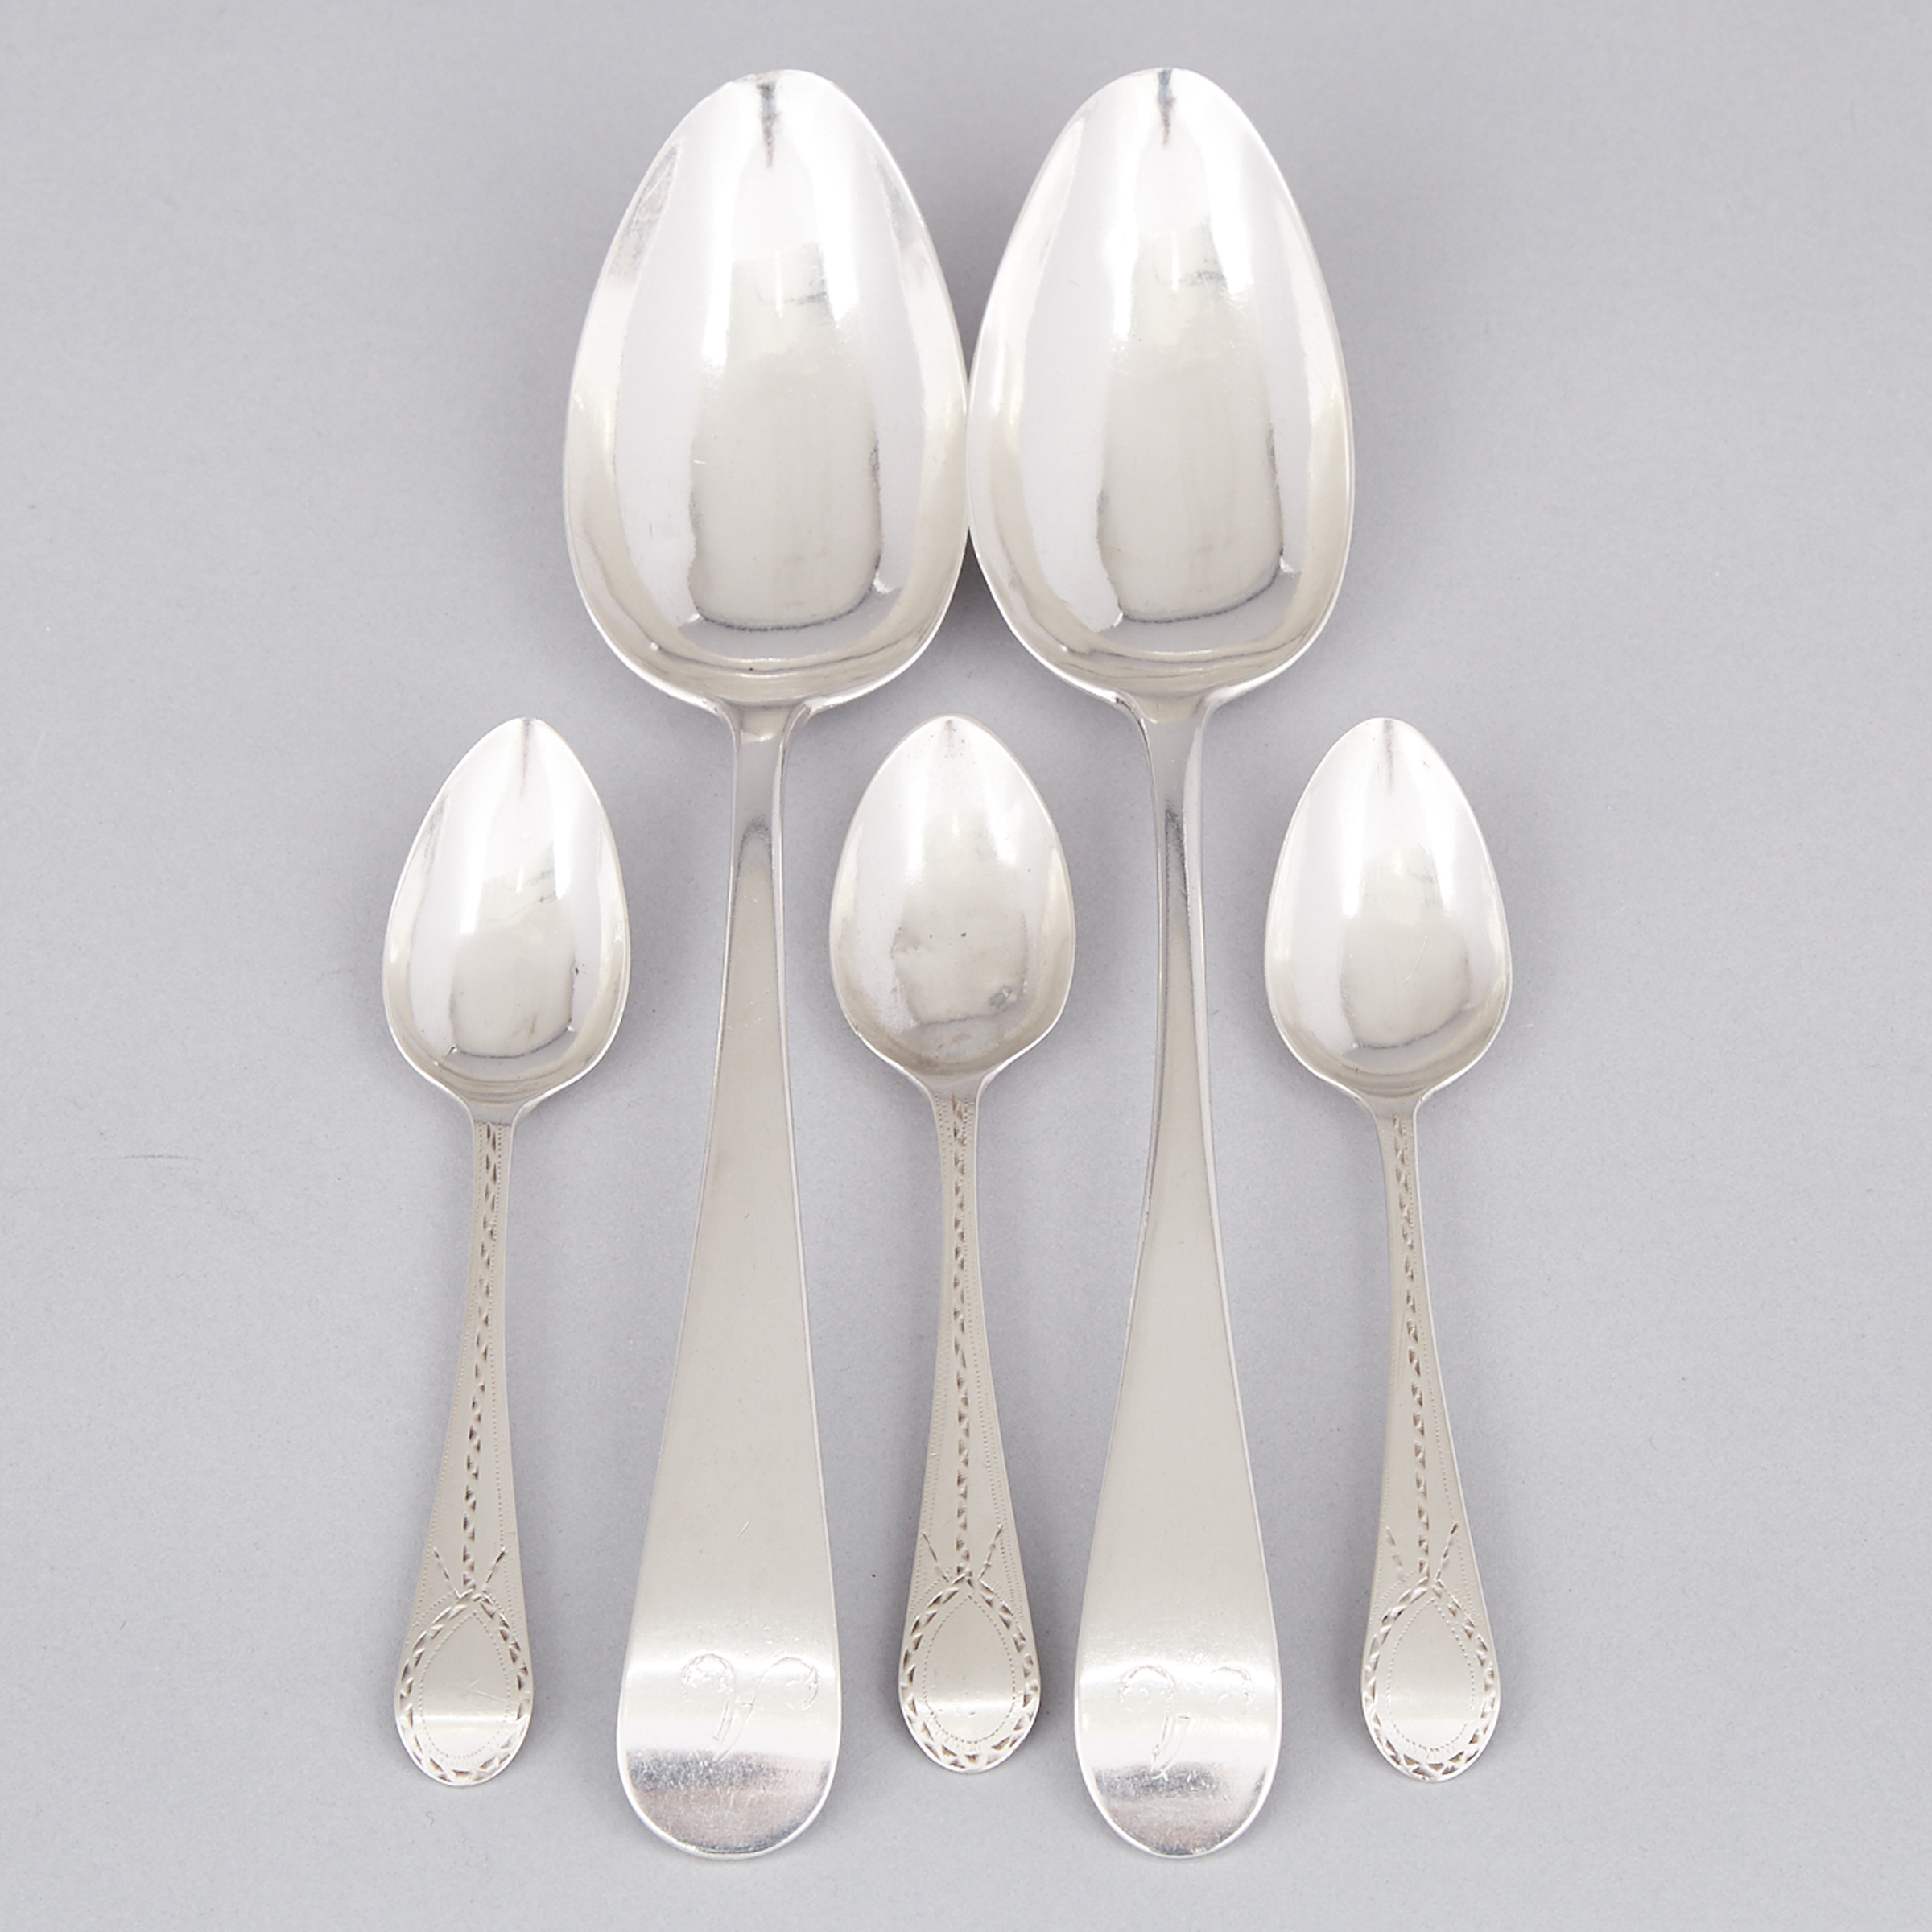 Pair of Canadian Silver Old English Pattern Table Spoons and Three Bright-Cut Tea Spoons, possibly L. Halliday, Montreal, Que., early 19th century